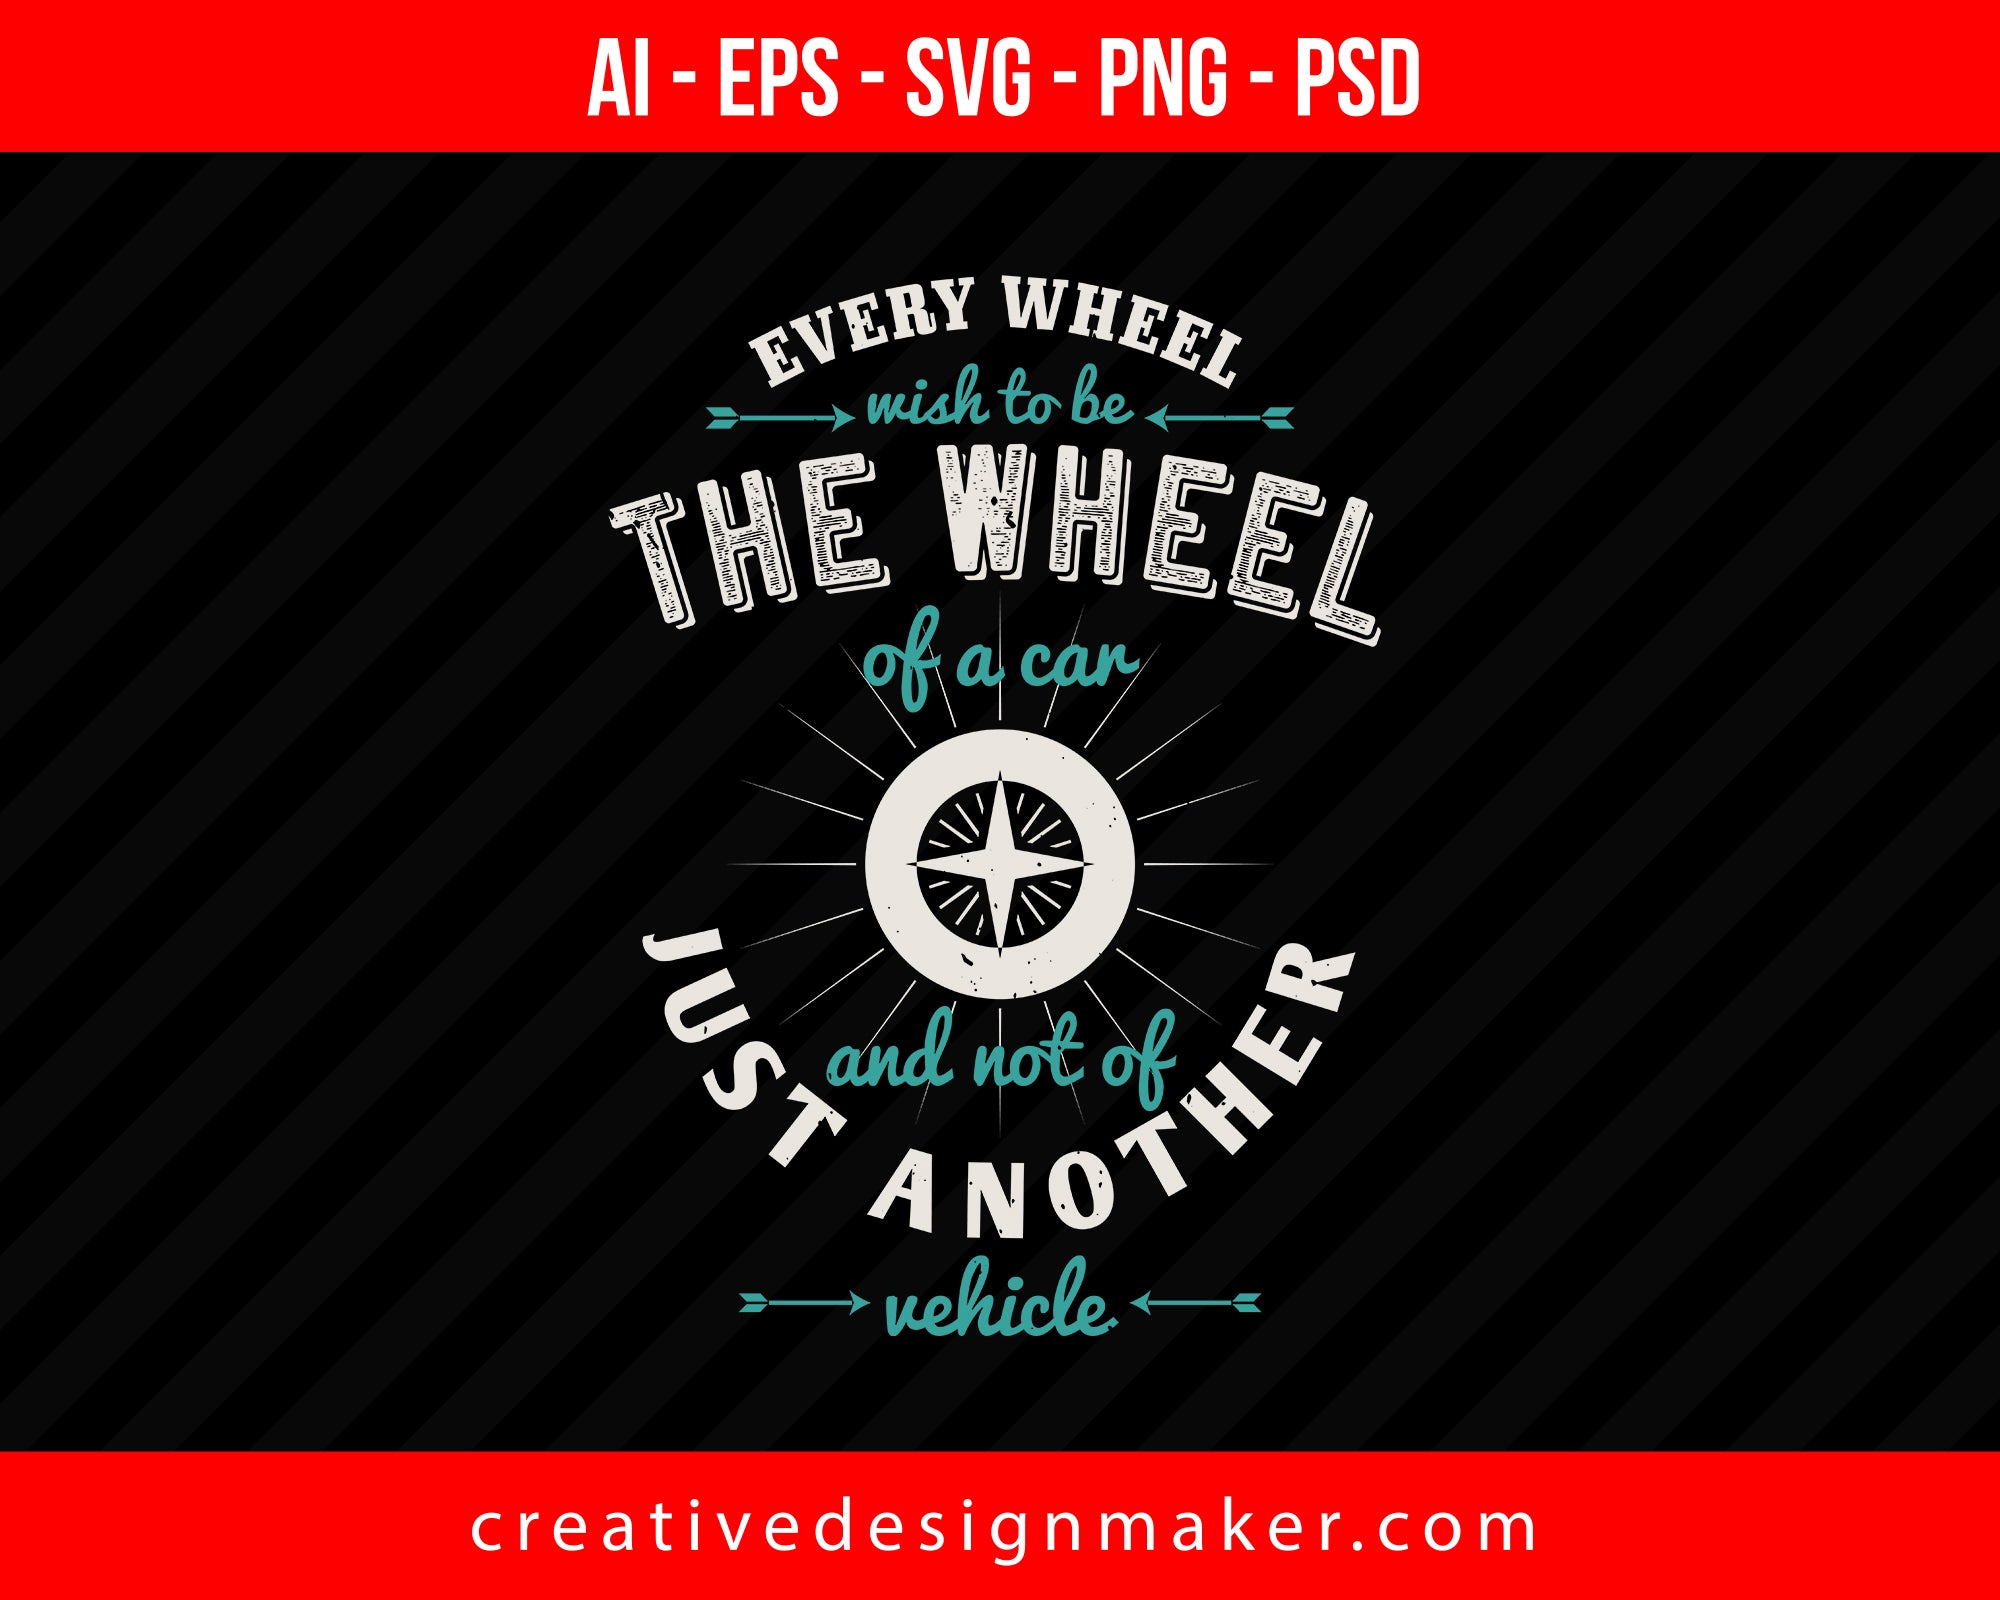 Every wheel wish to be the wheel of a car, and not of just another Vehicles Print Ready Editable T-Shirt SVG Design!